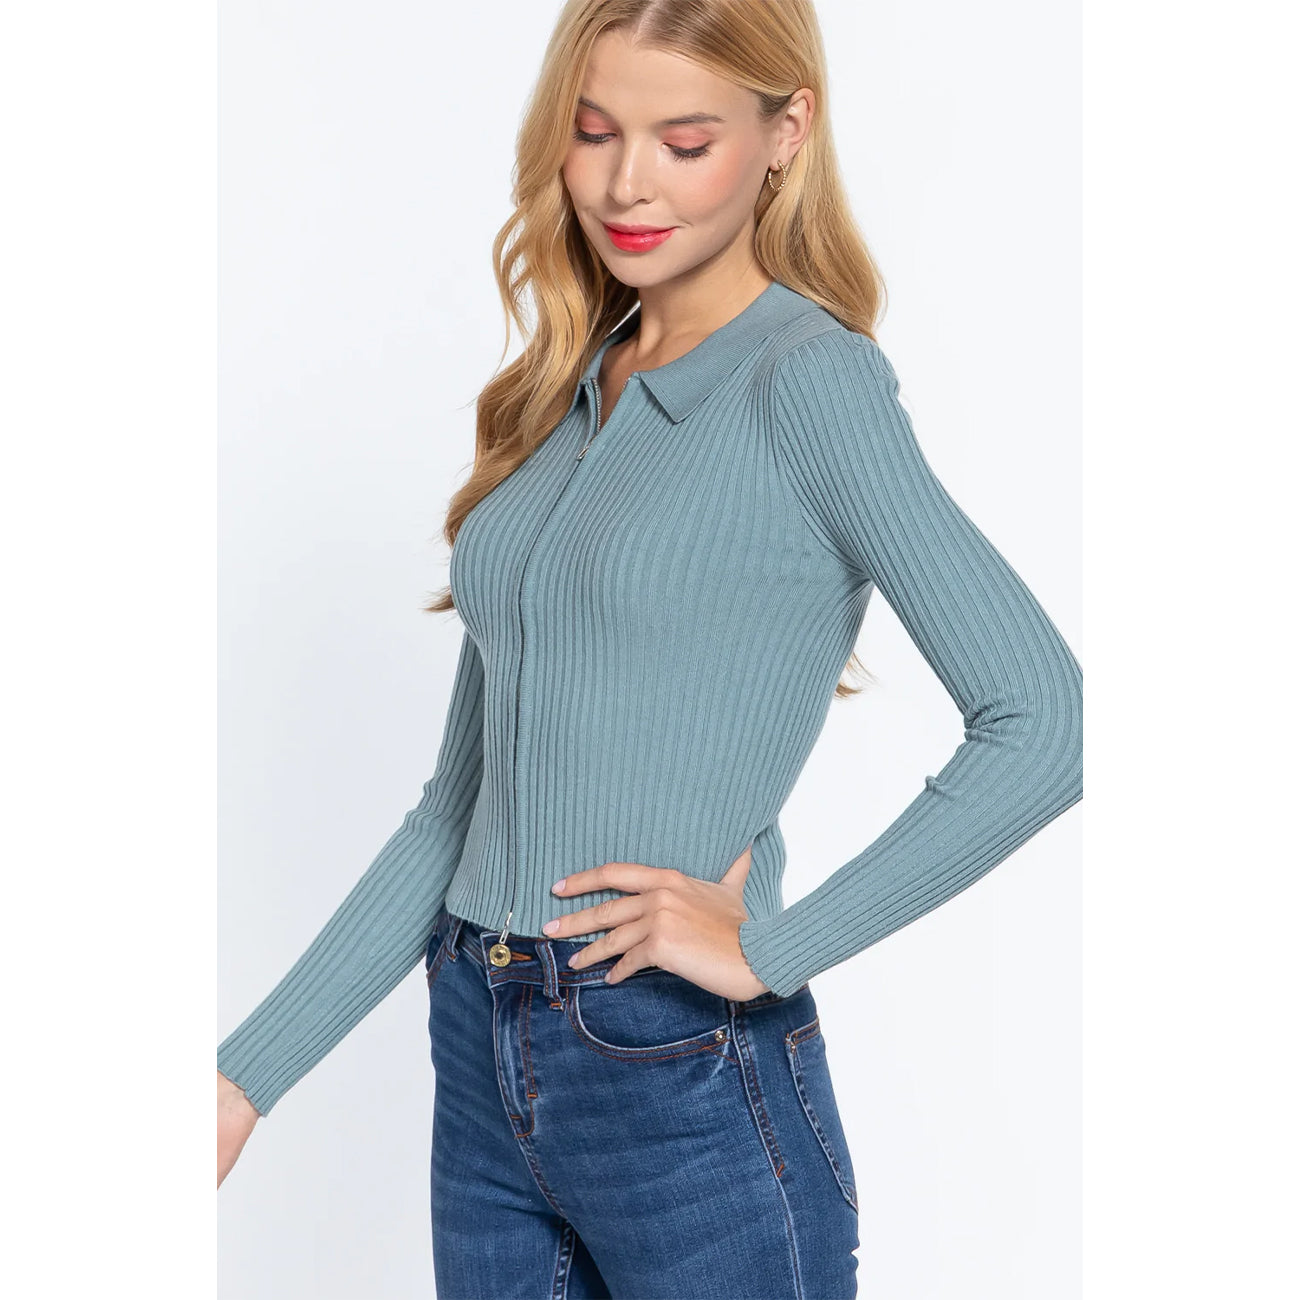 Notched Collar Zippered Sexy Women's Sweater